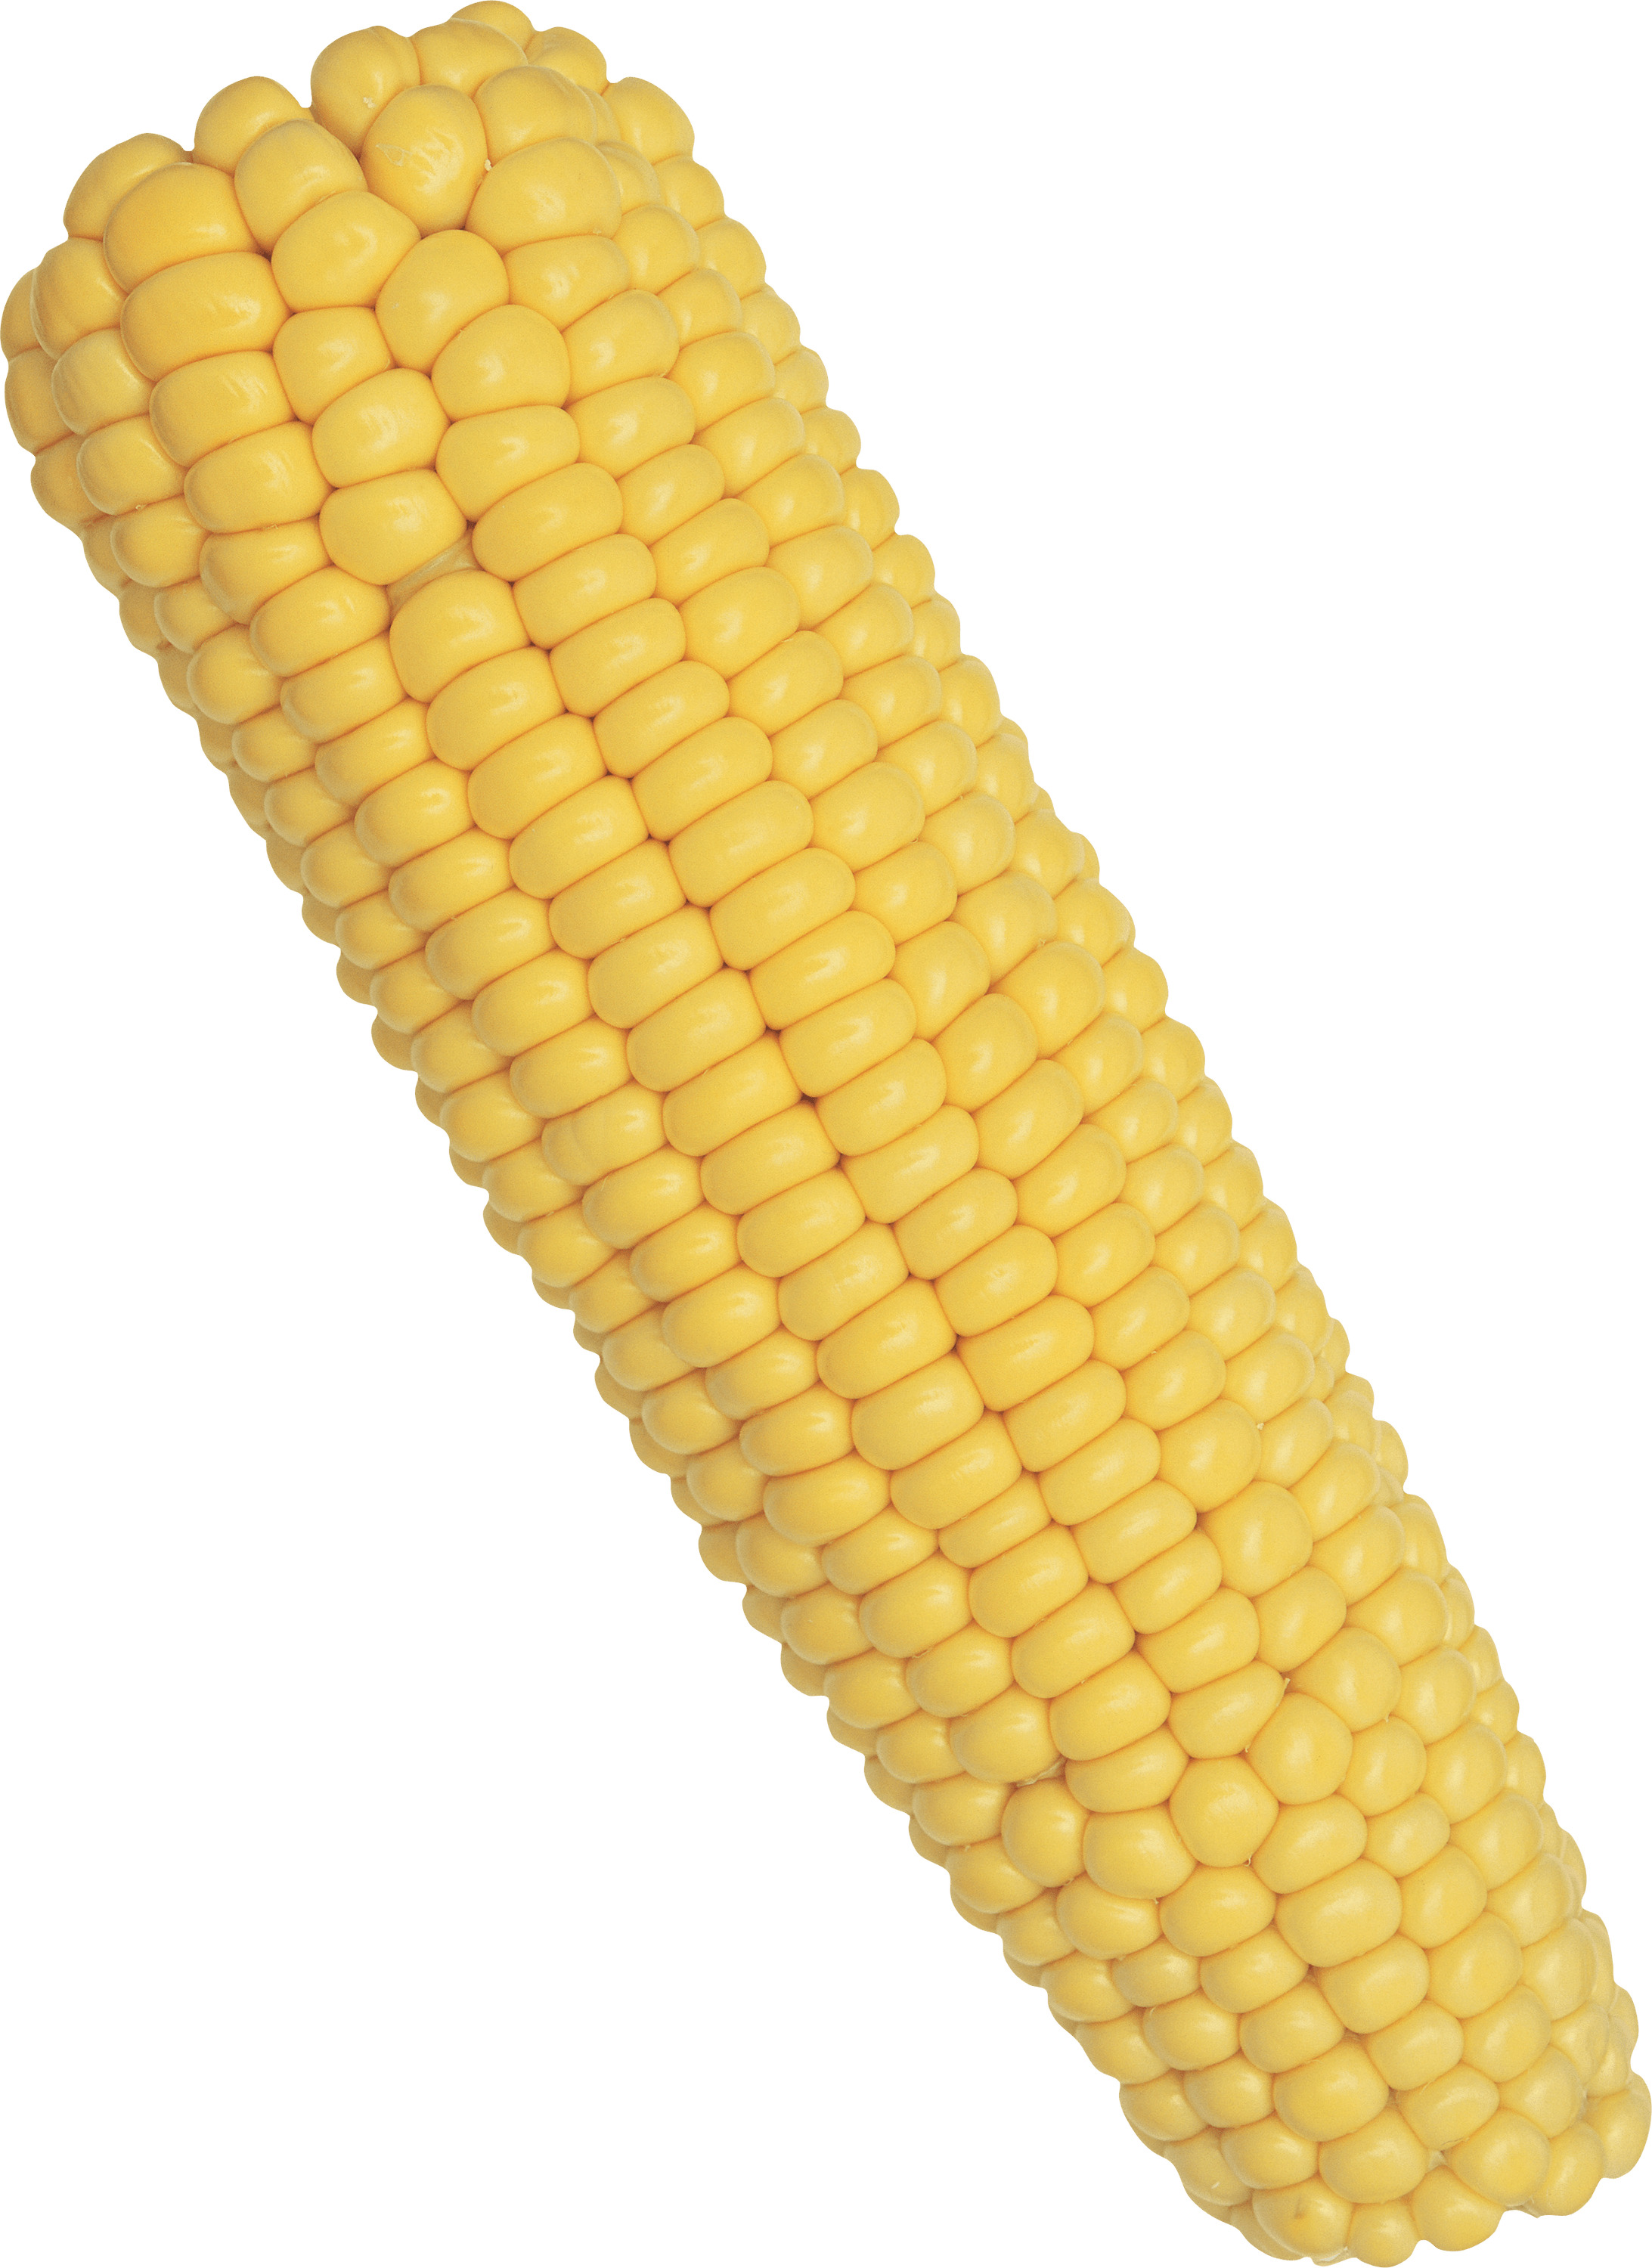 Corn Solo png icons